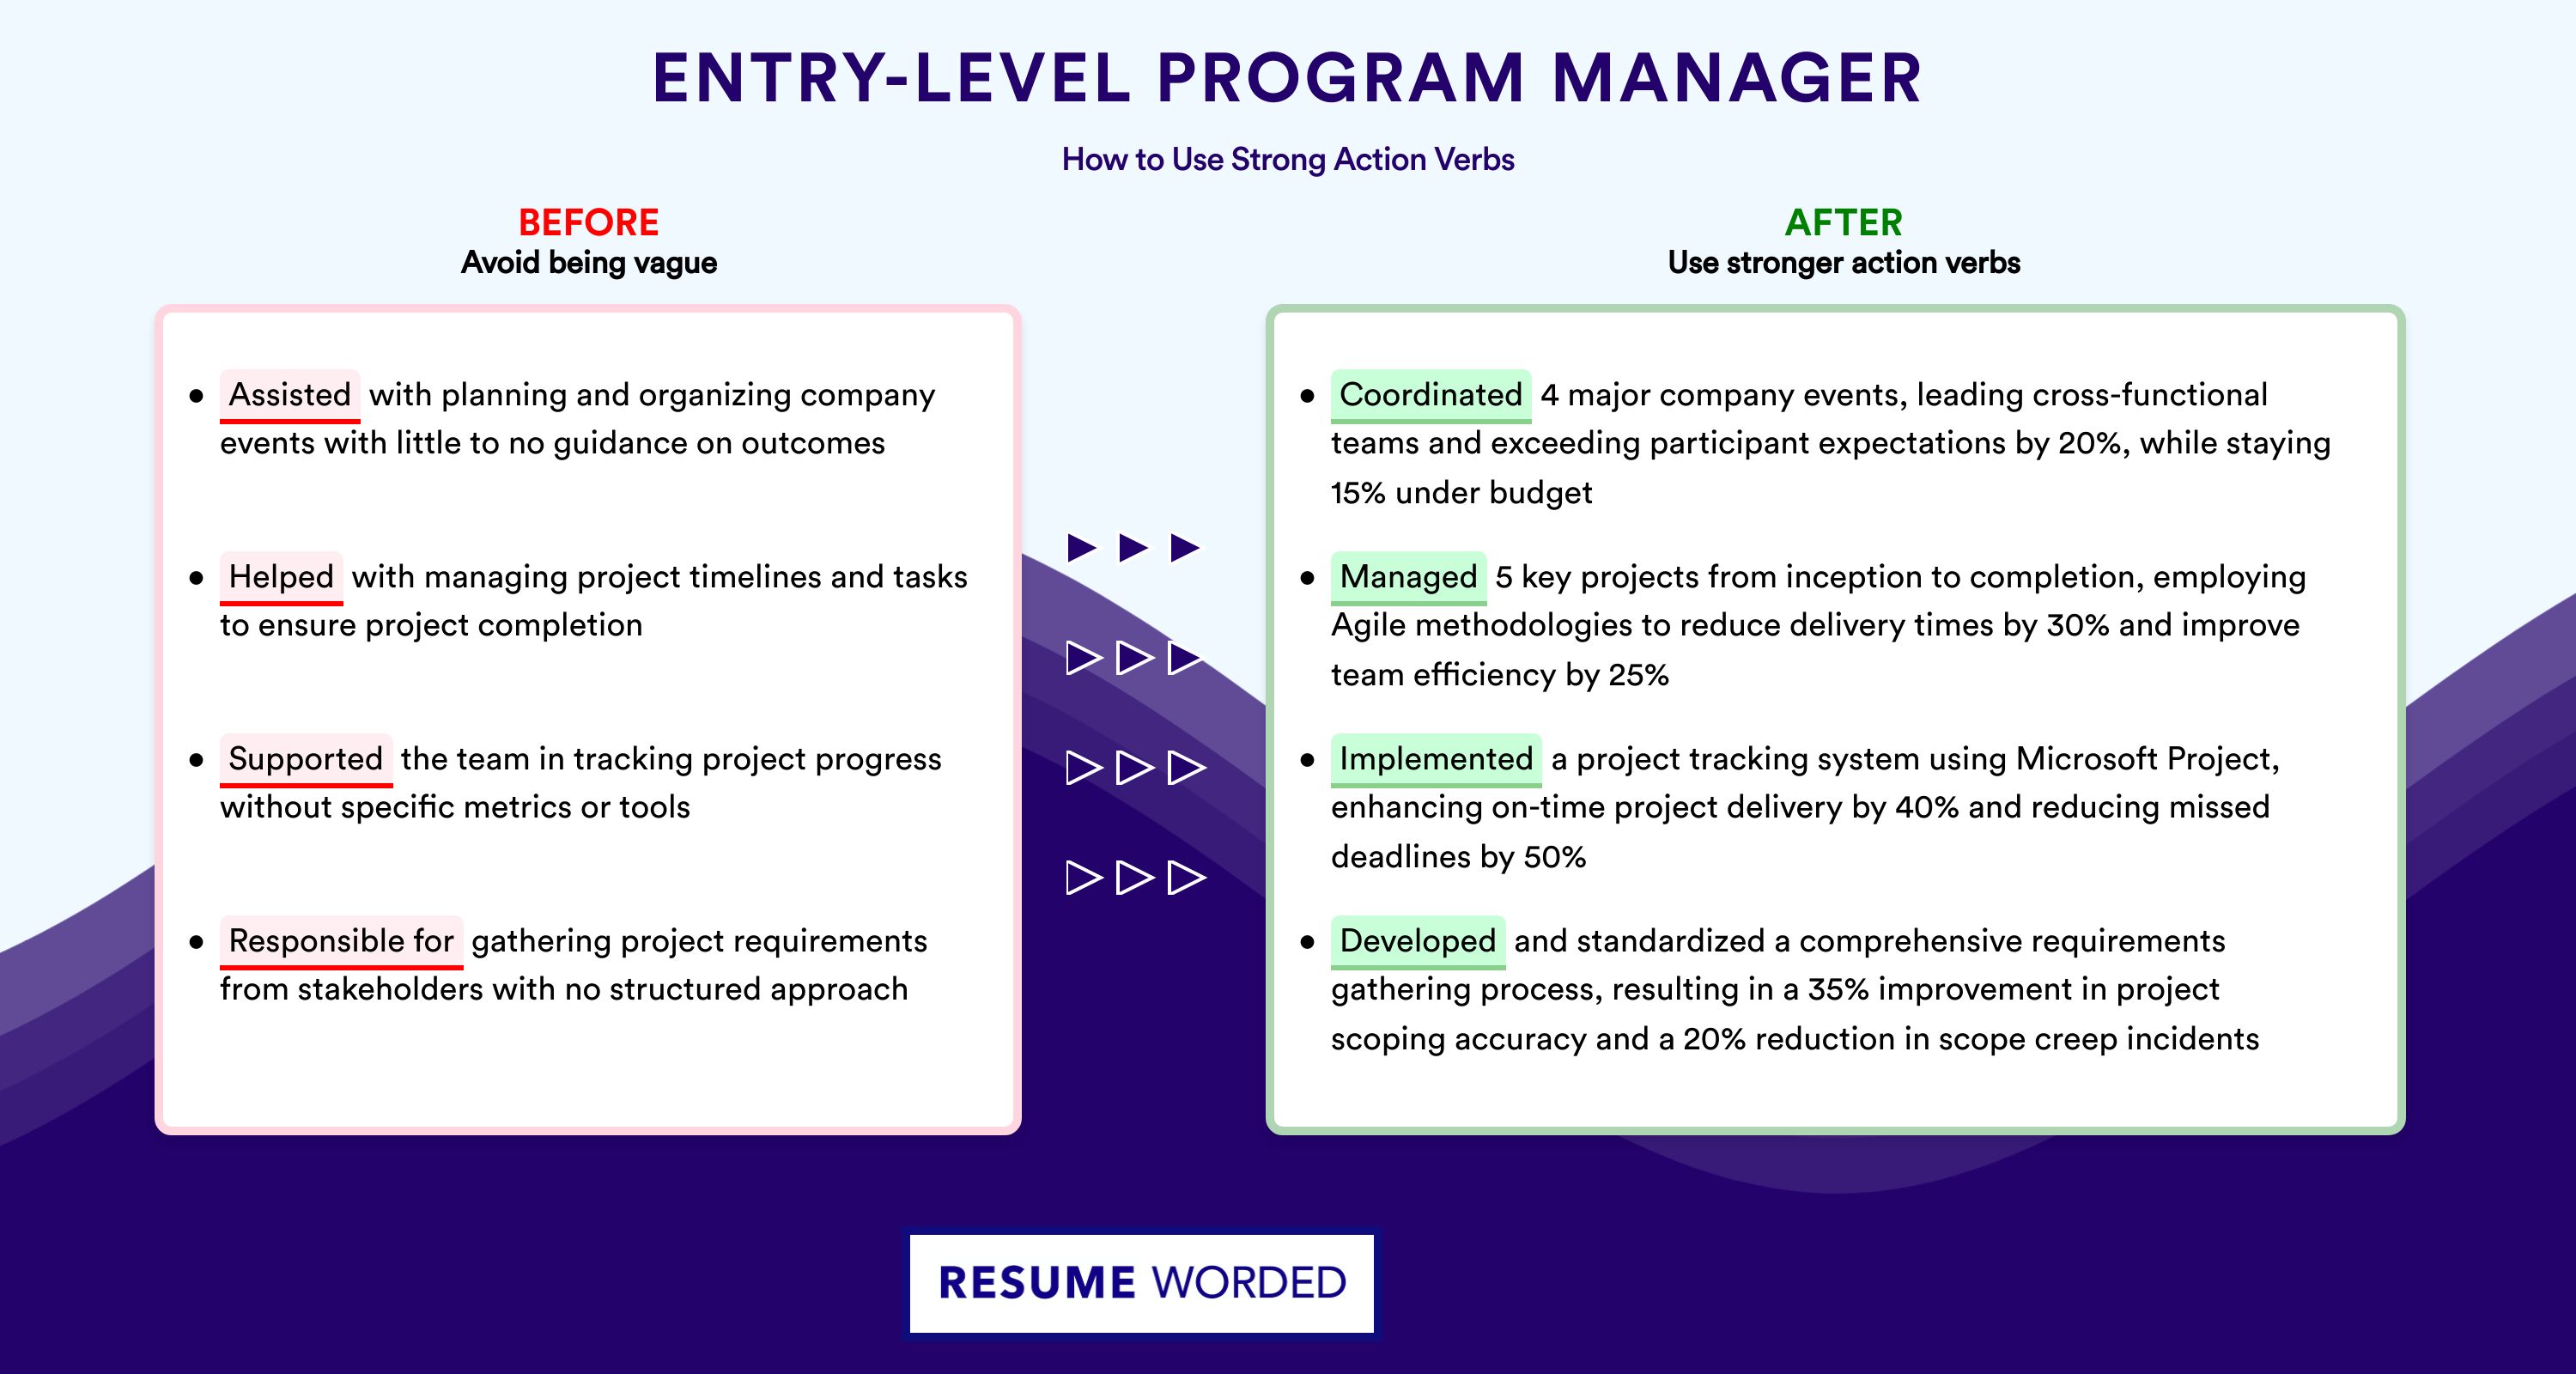 Action Verbs for Entry-Level Program Manager